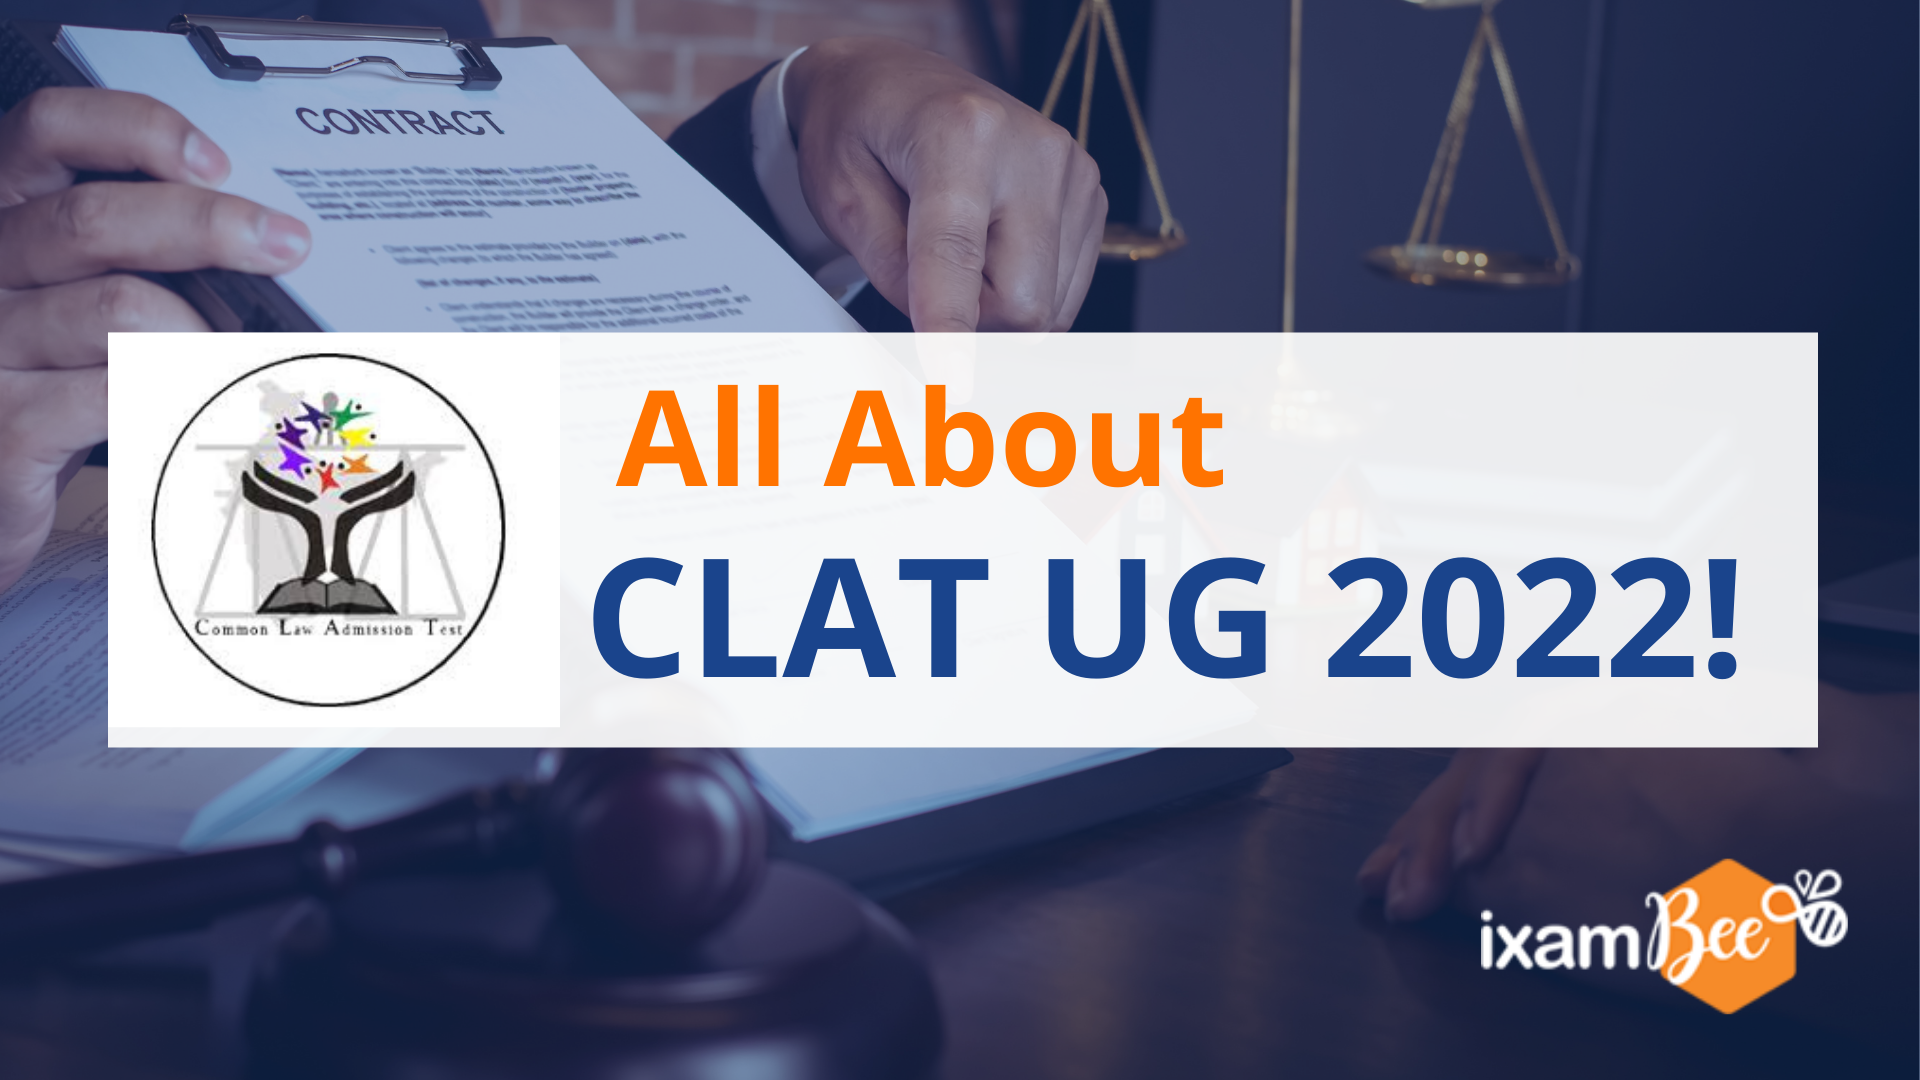 All About CLAT UG 2022!